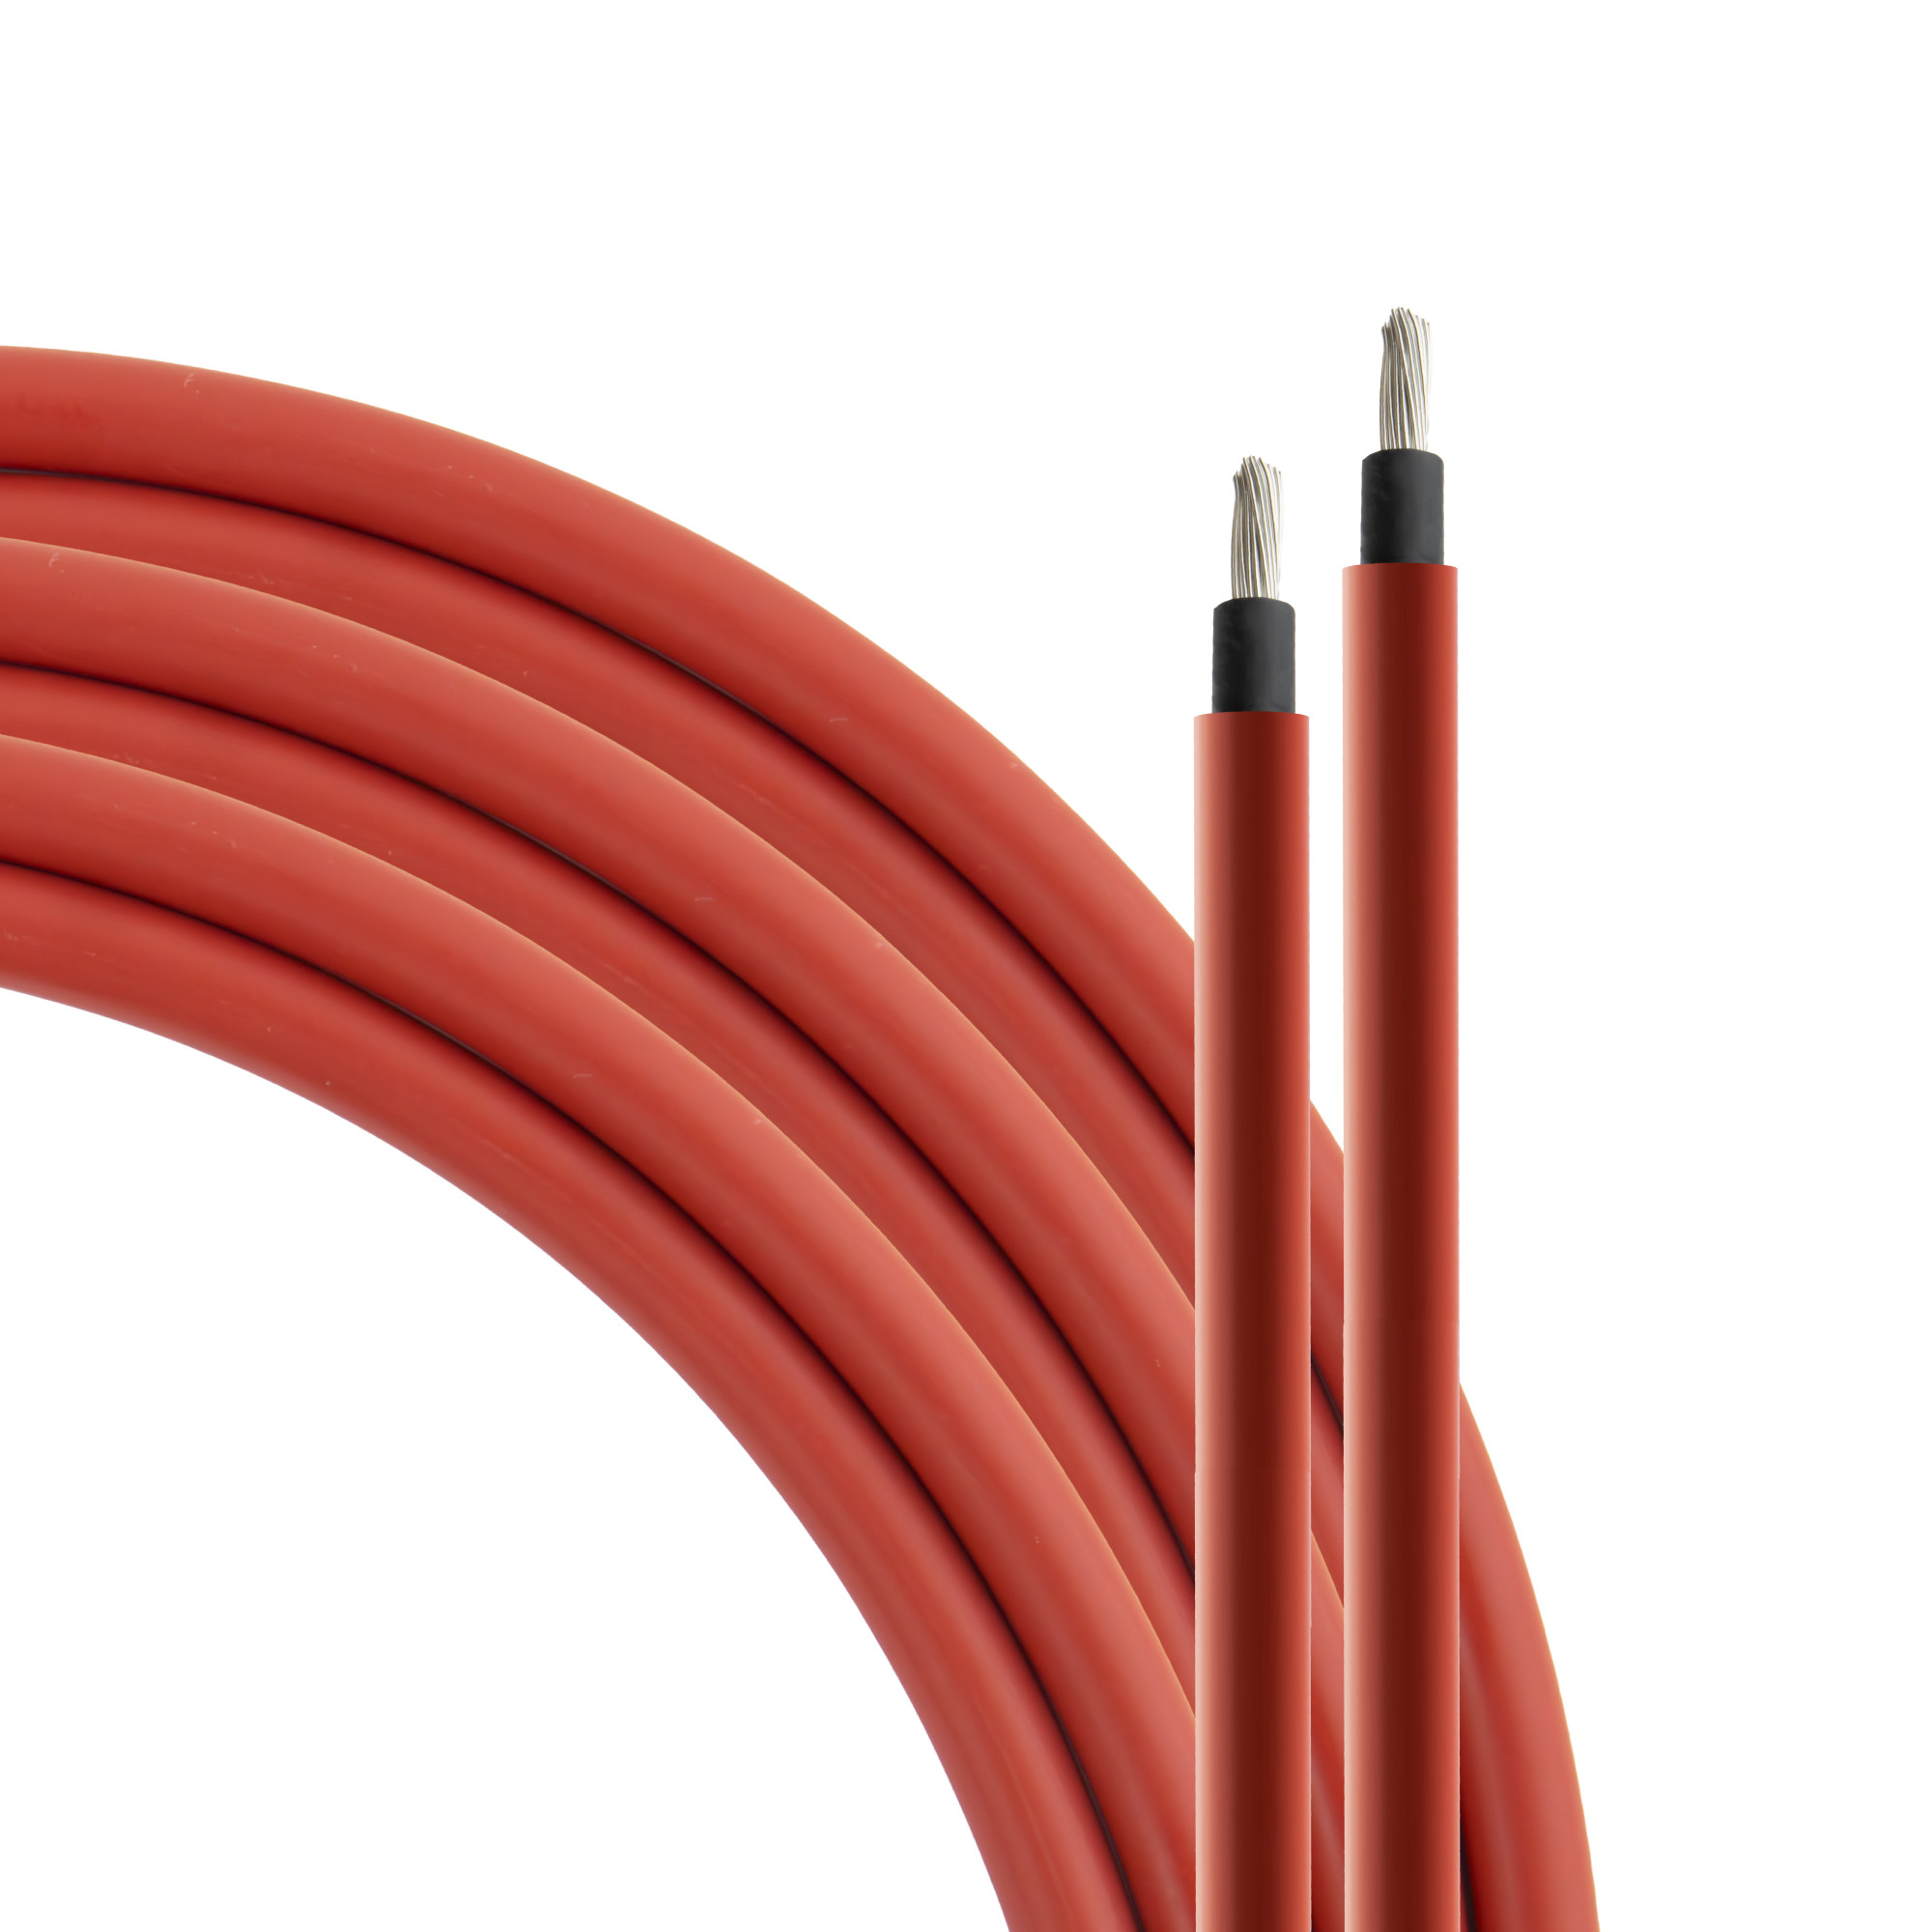 Solar cable 4 mm² red - 5m